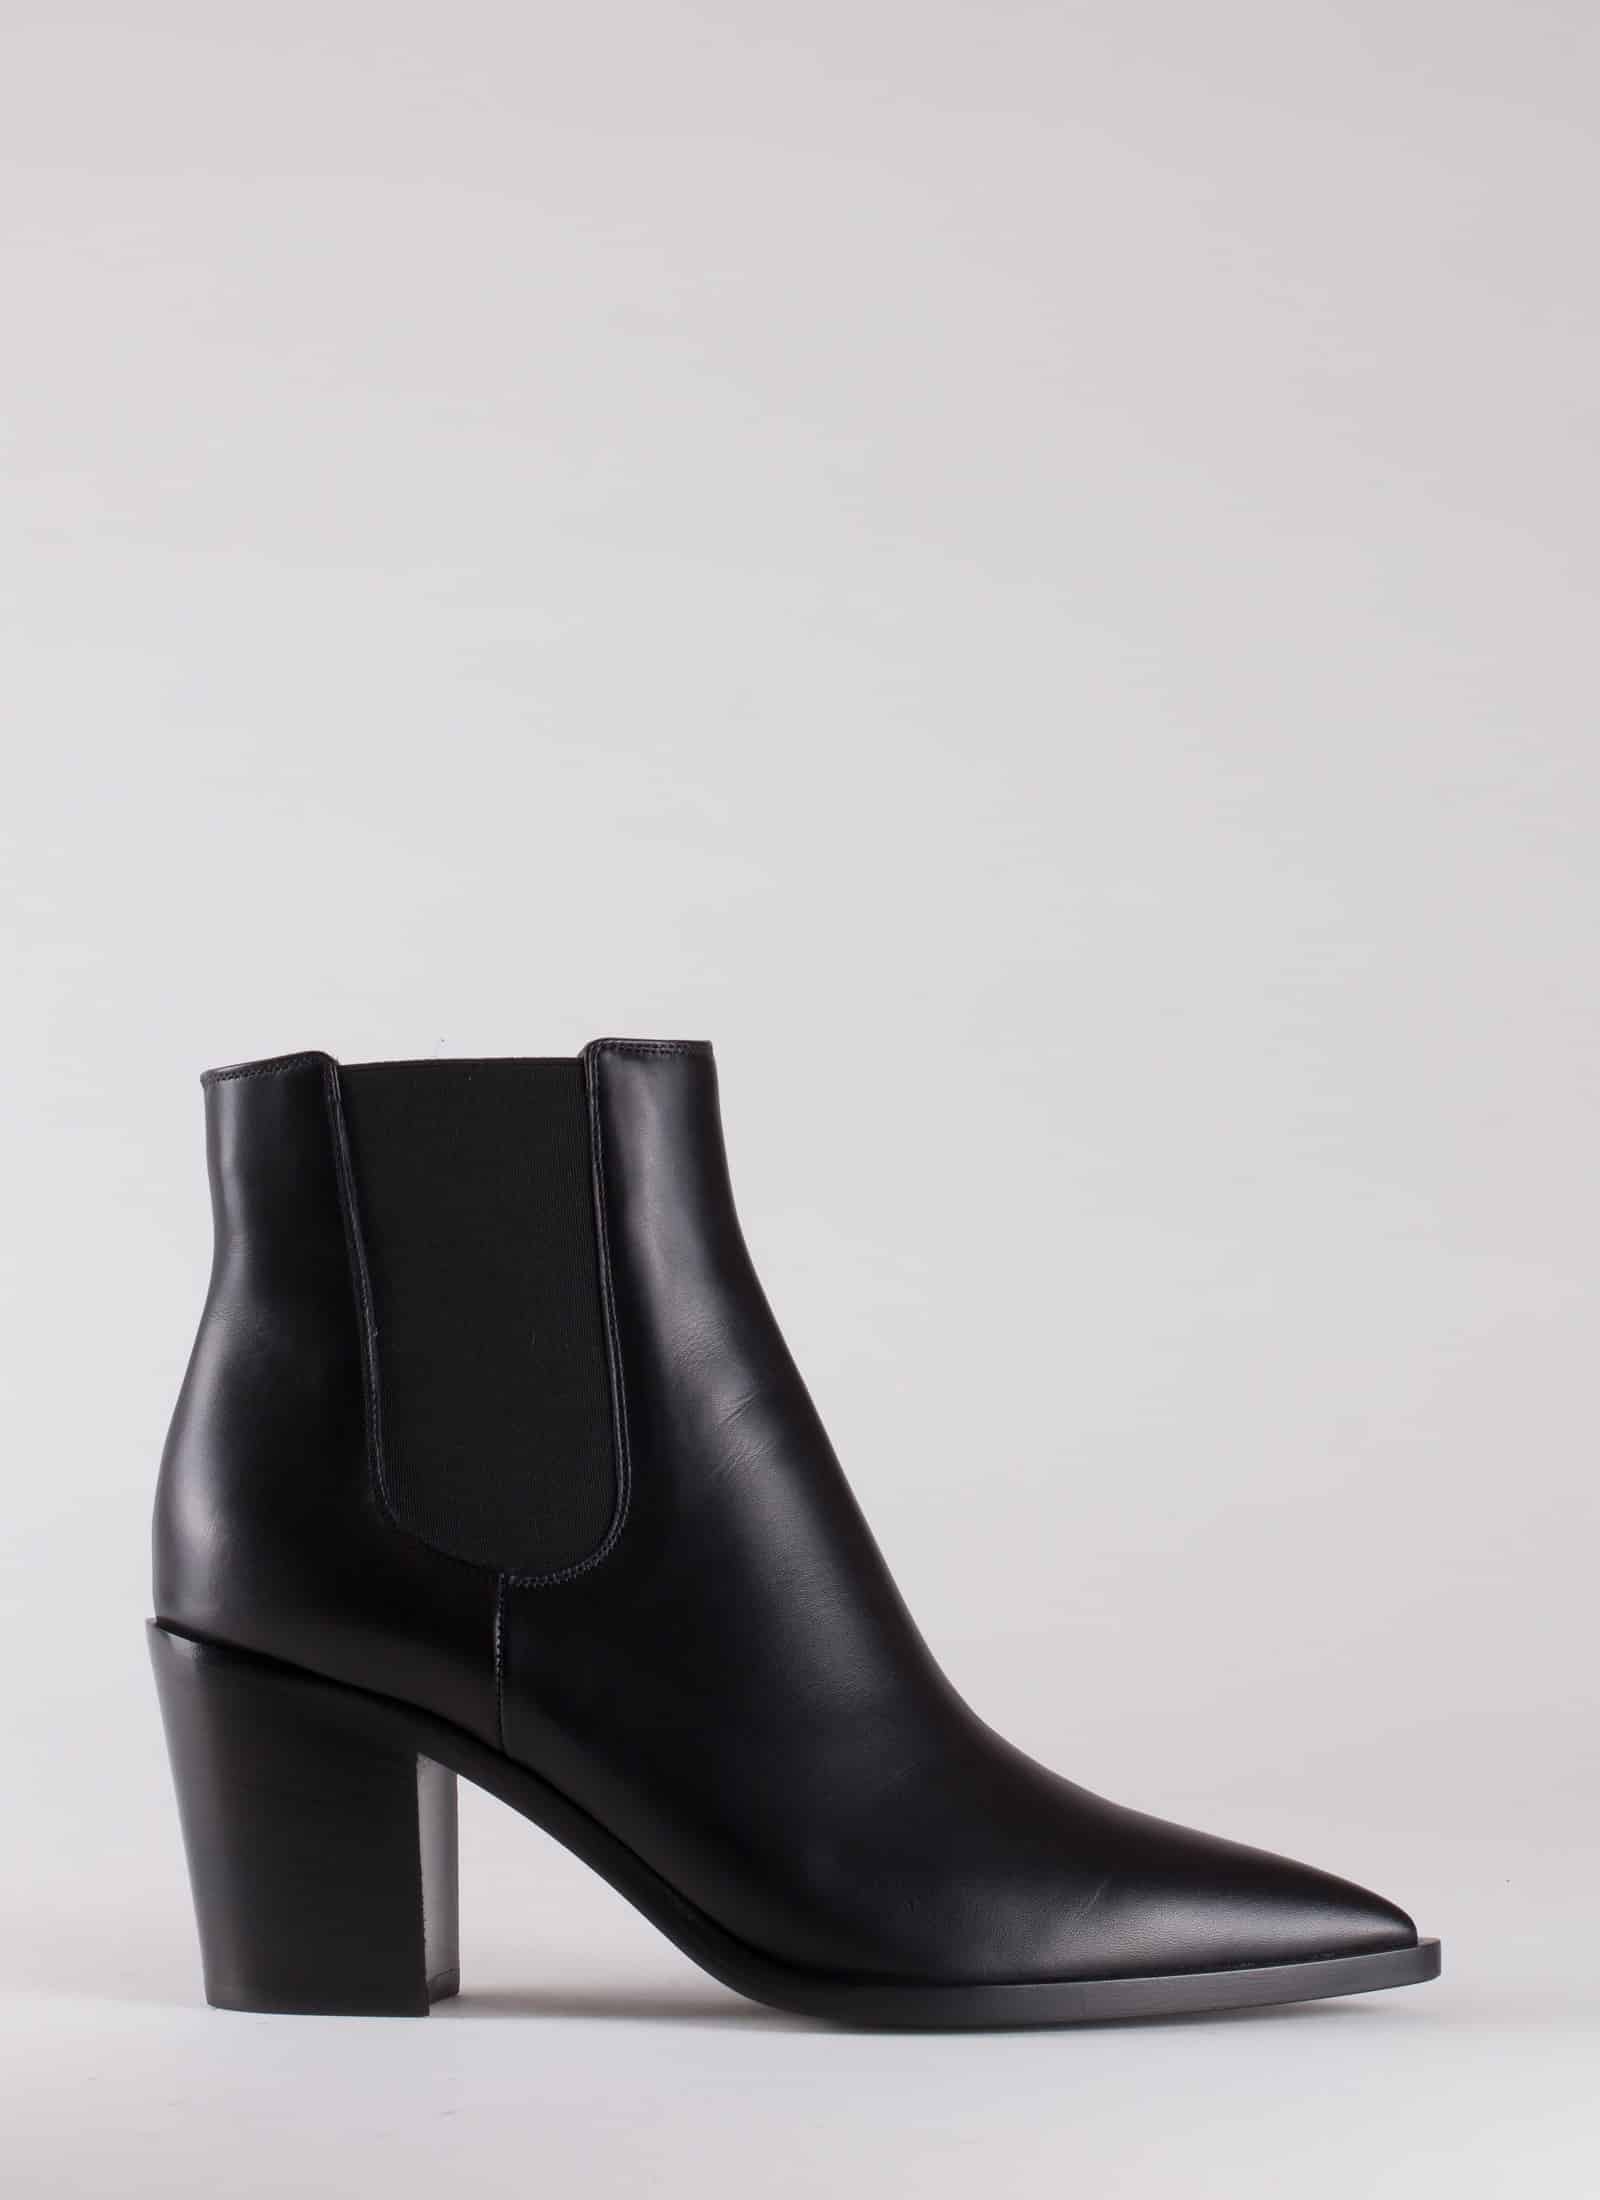 LEATHER BOOTS "ROMNEY" - GIANVITO ROSSI